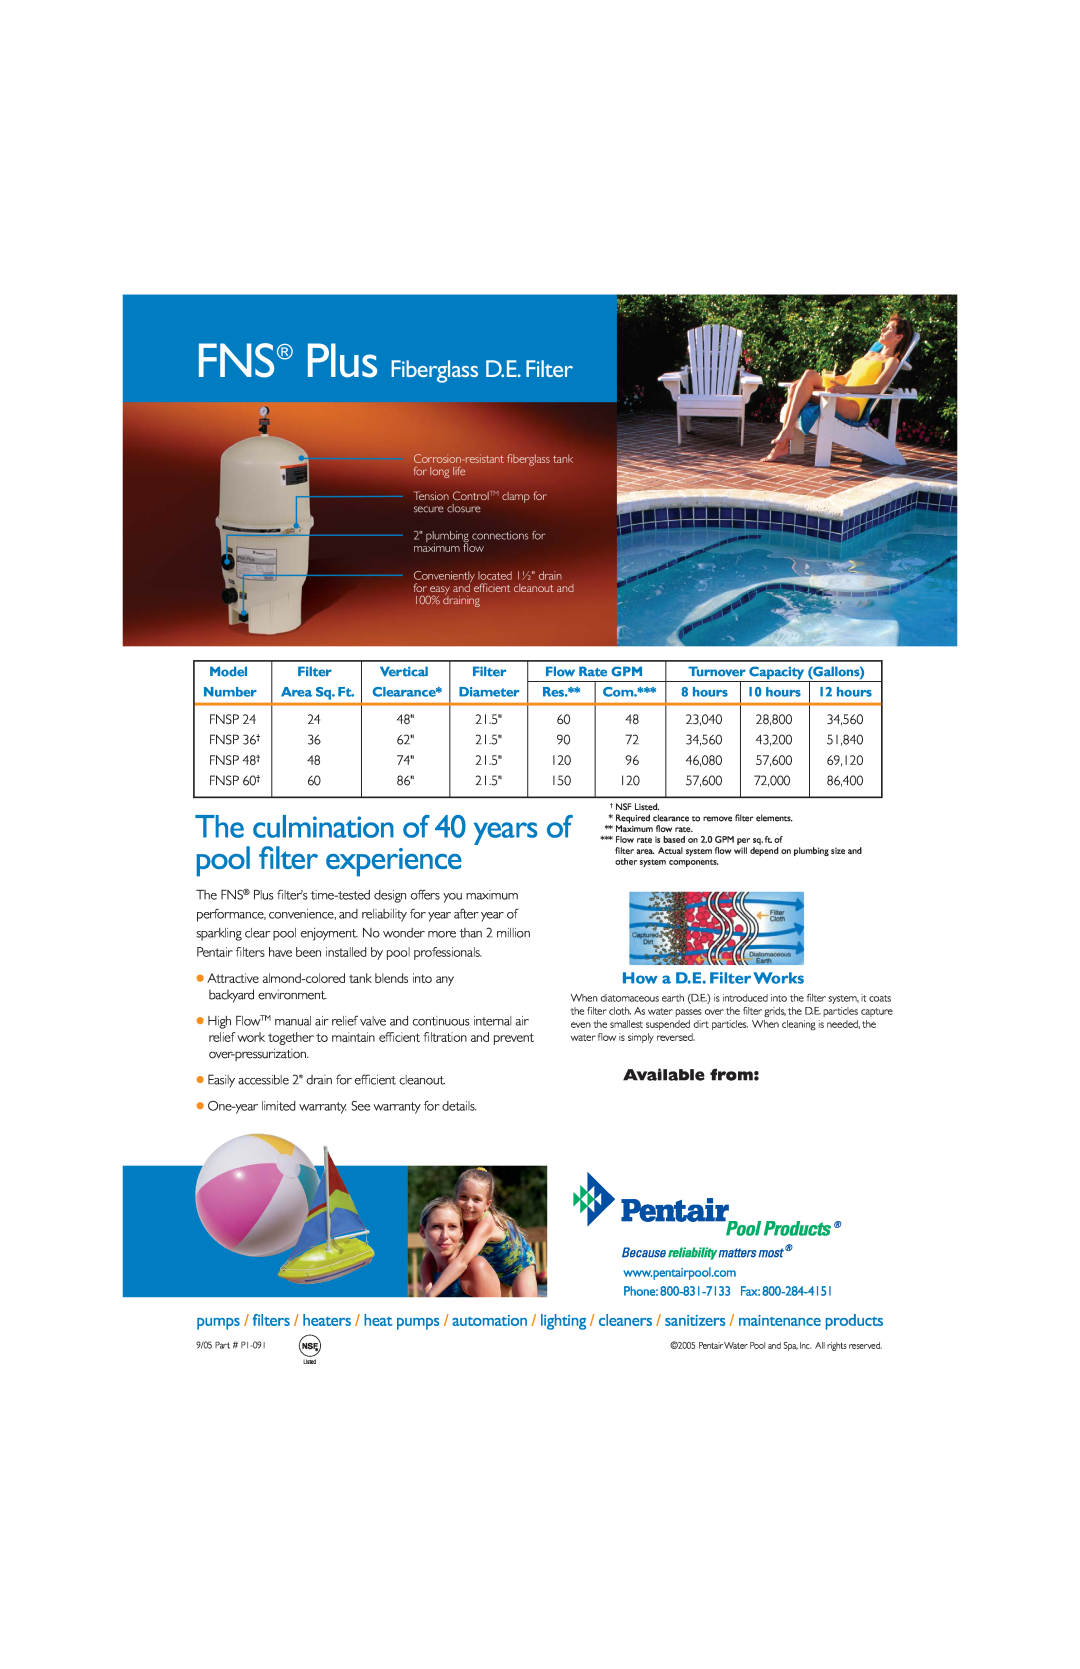 Pentair manual pool filter experience, FNS Plus Fiberglass D.E. Filter, The culmination of 40 years of, Available from 